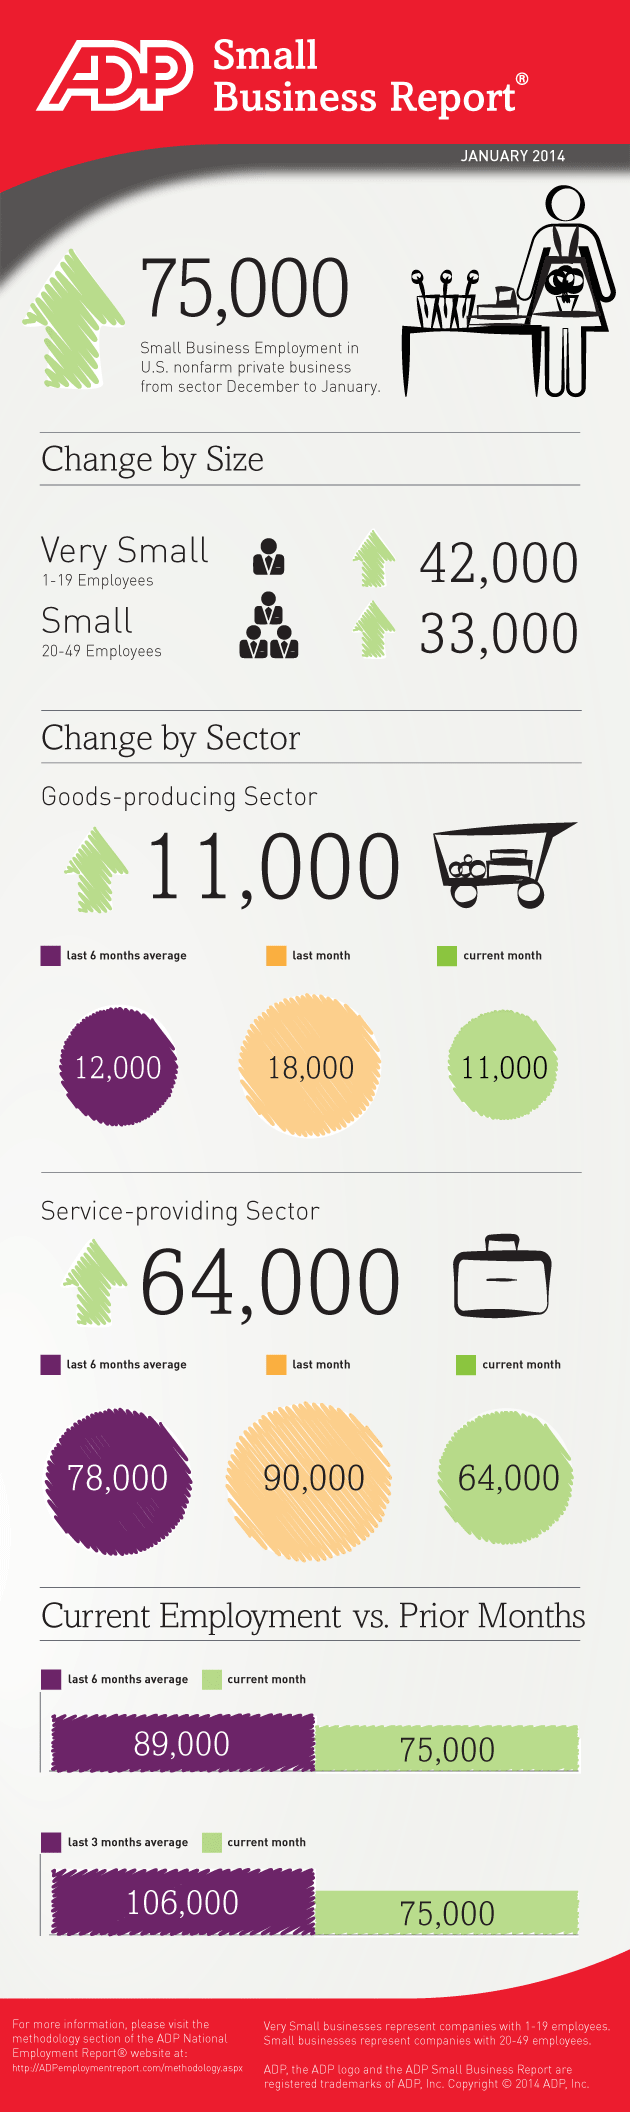 Small Buisness Report, January 2014 Infographic